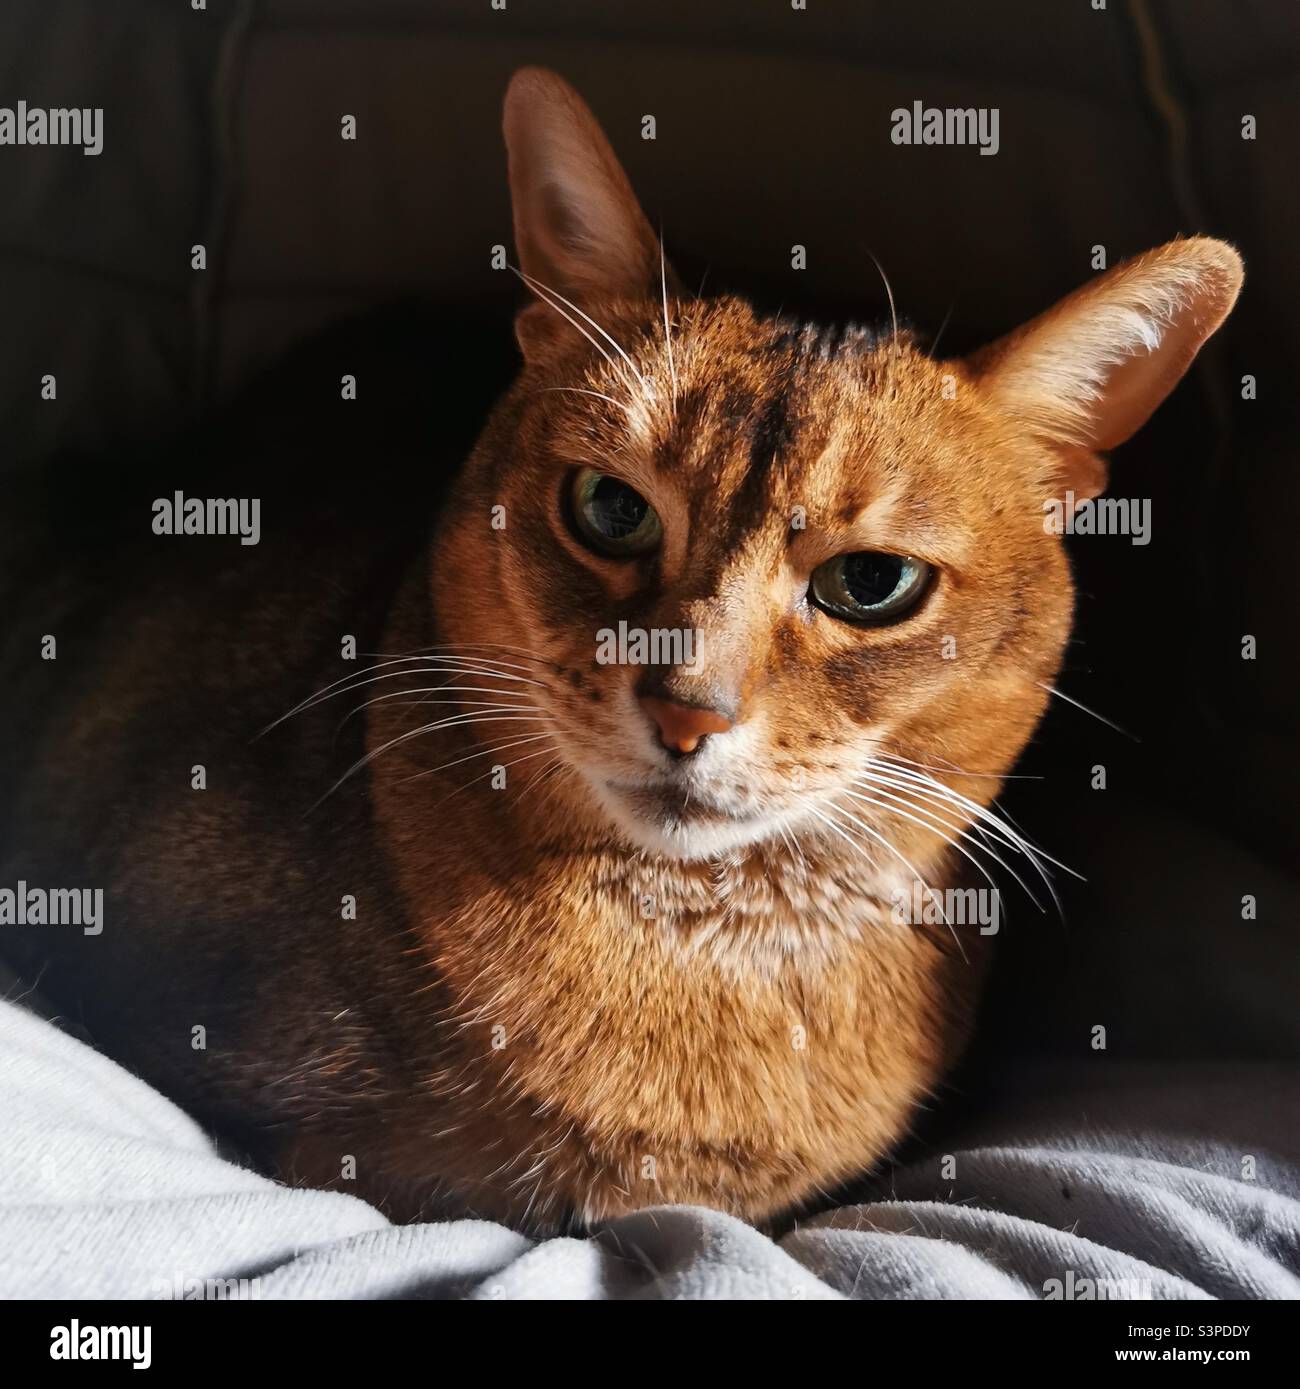 Abyssinian cat close up Stock Photo